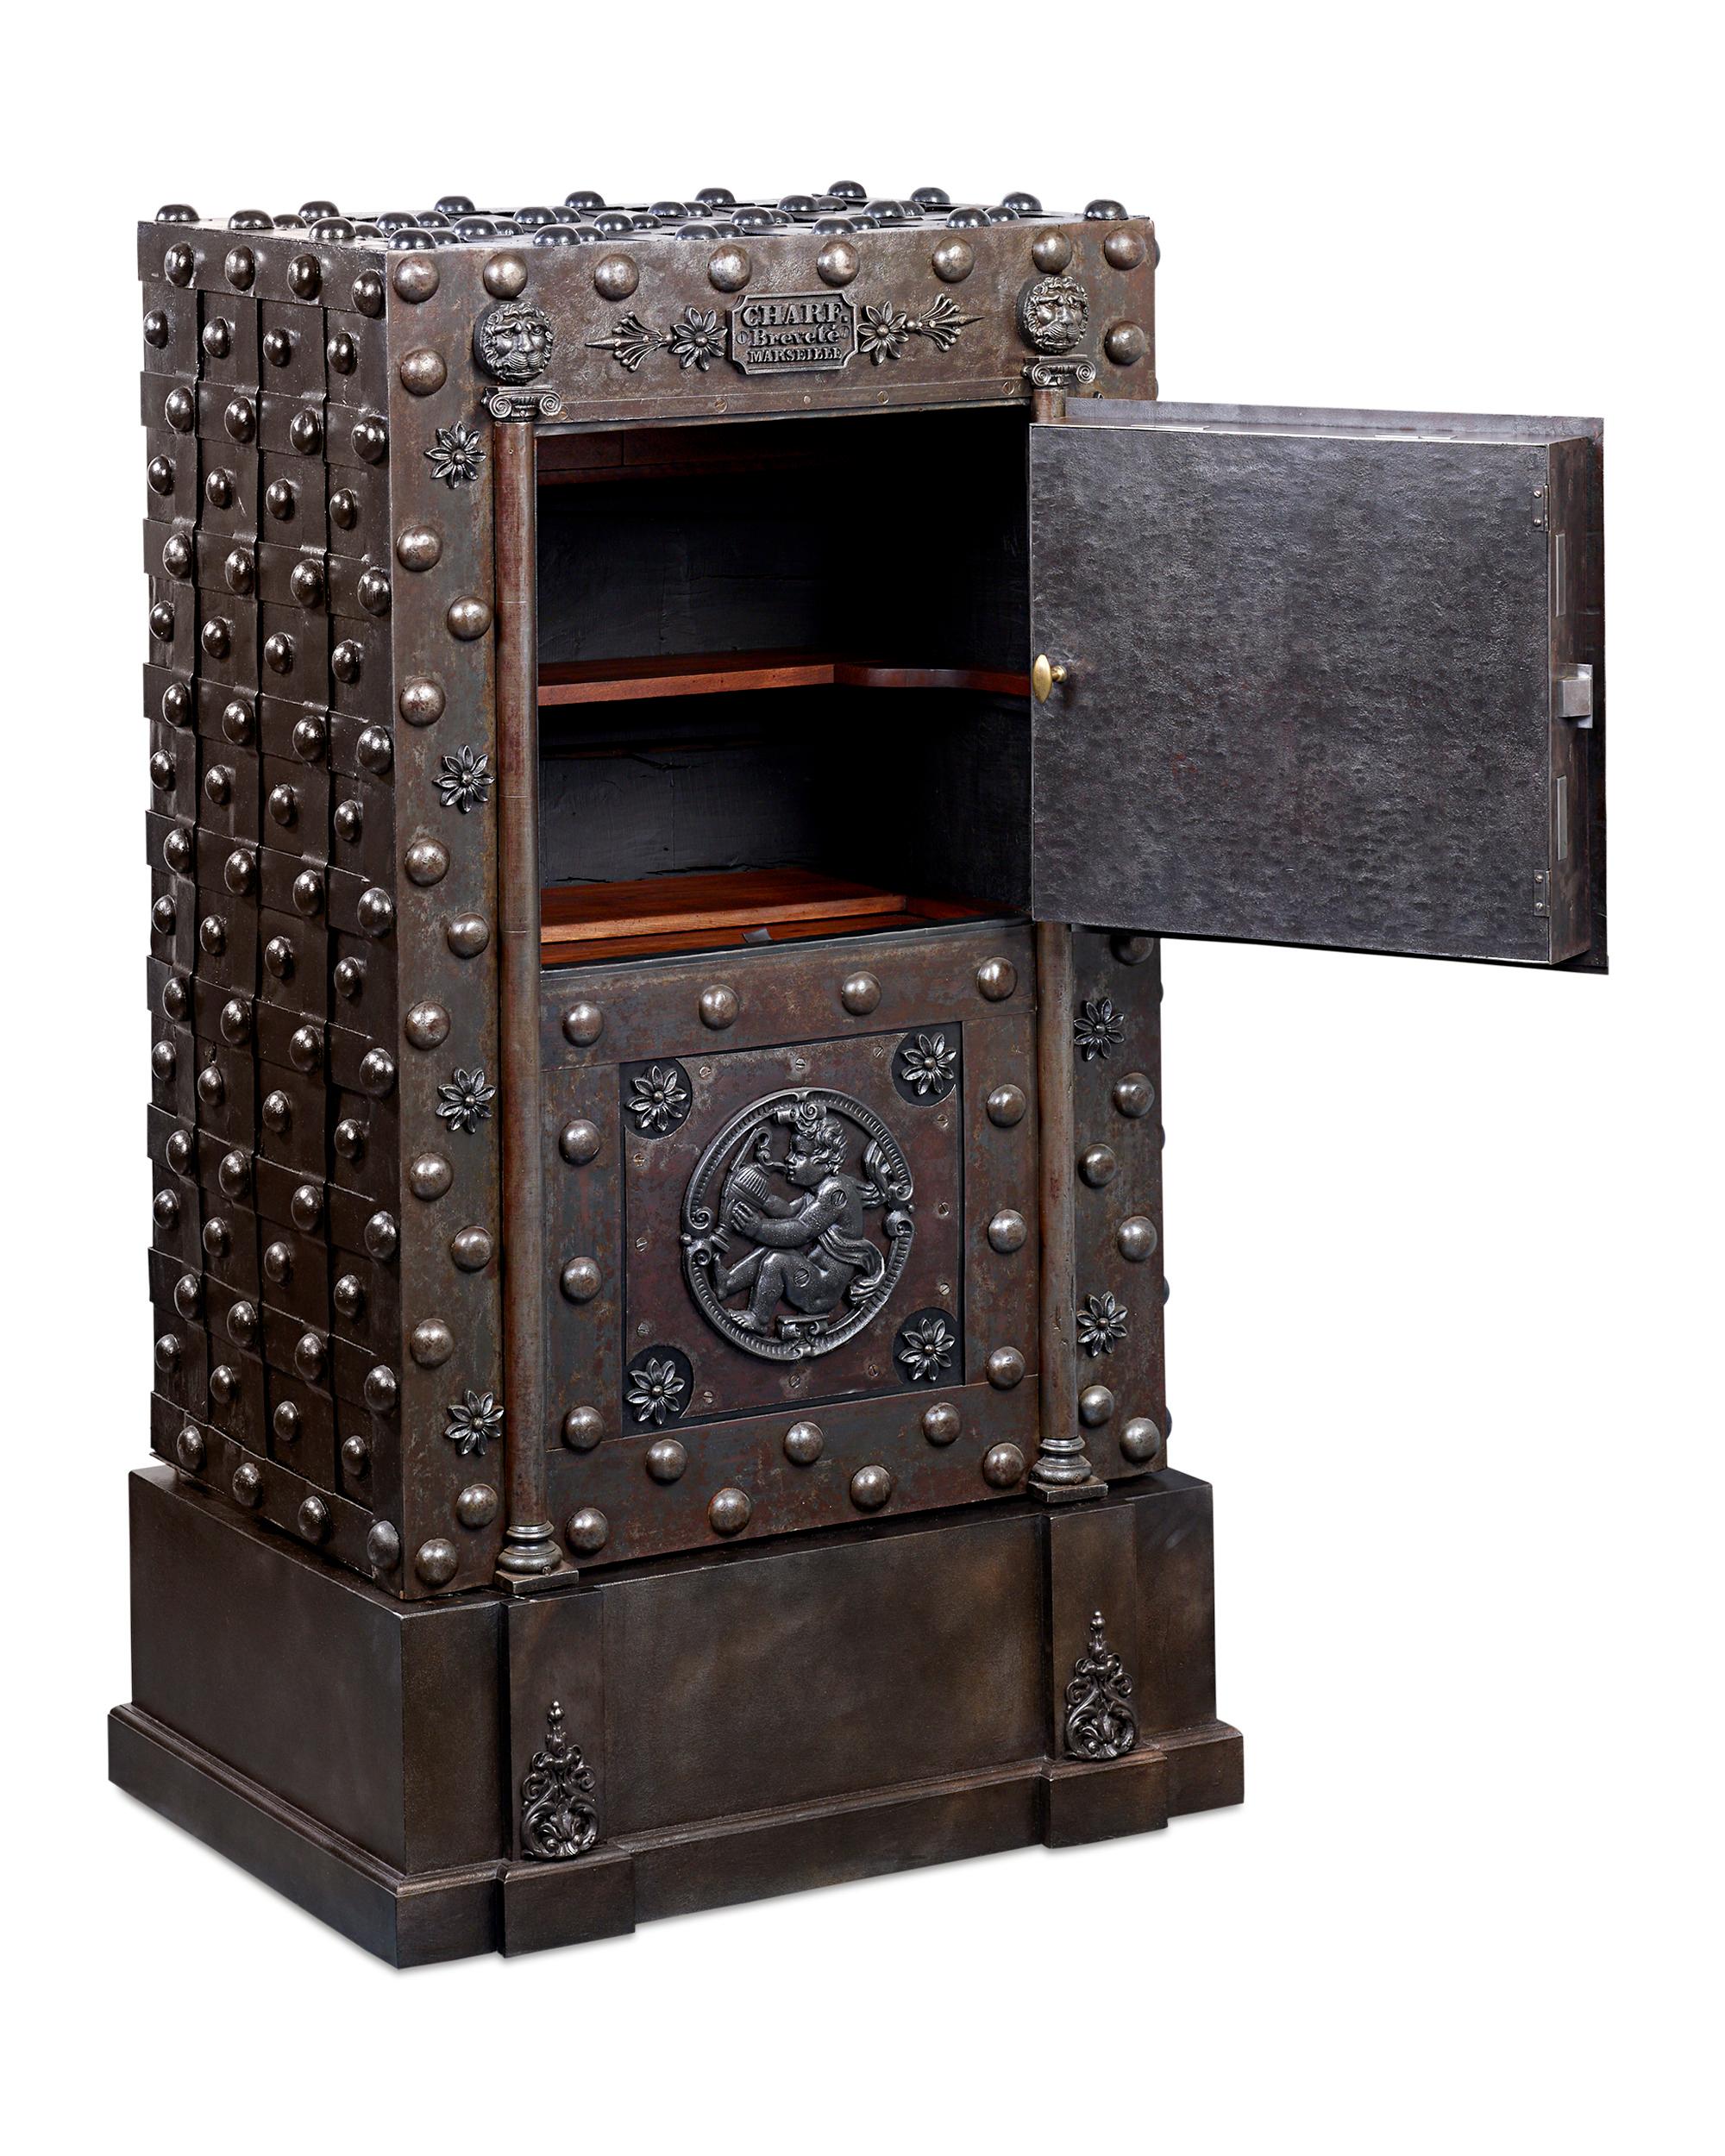 A marvel of mechanical complexity and exceptional craftsmanship, this fully functioning French hobnail safe was one of the most secure means by which valuables could be stored in the 19th century. Weighing nearly 700 pounds, the iron structure is